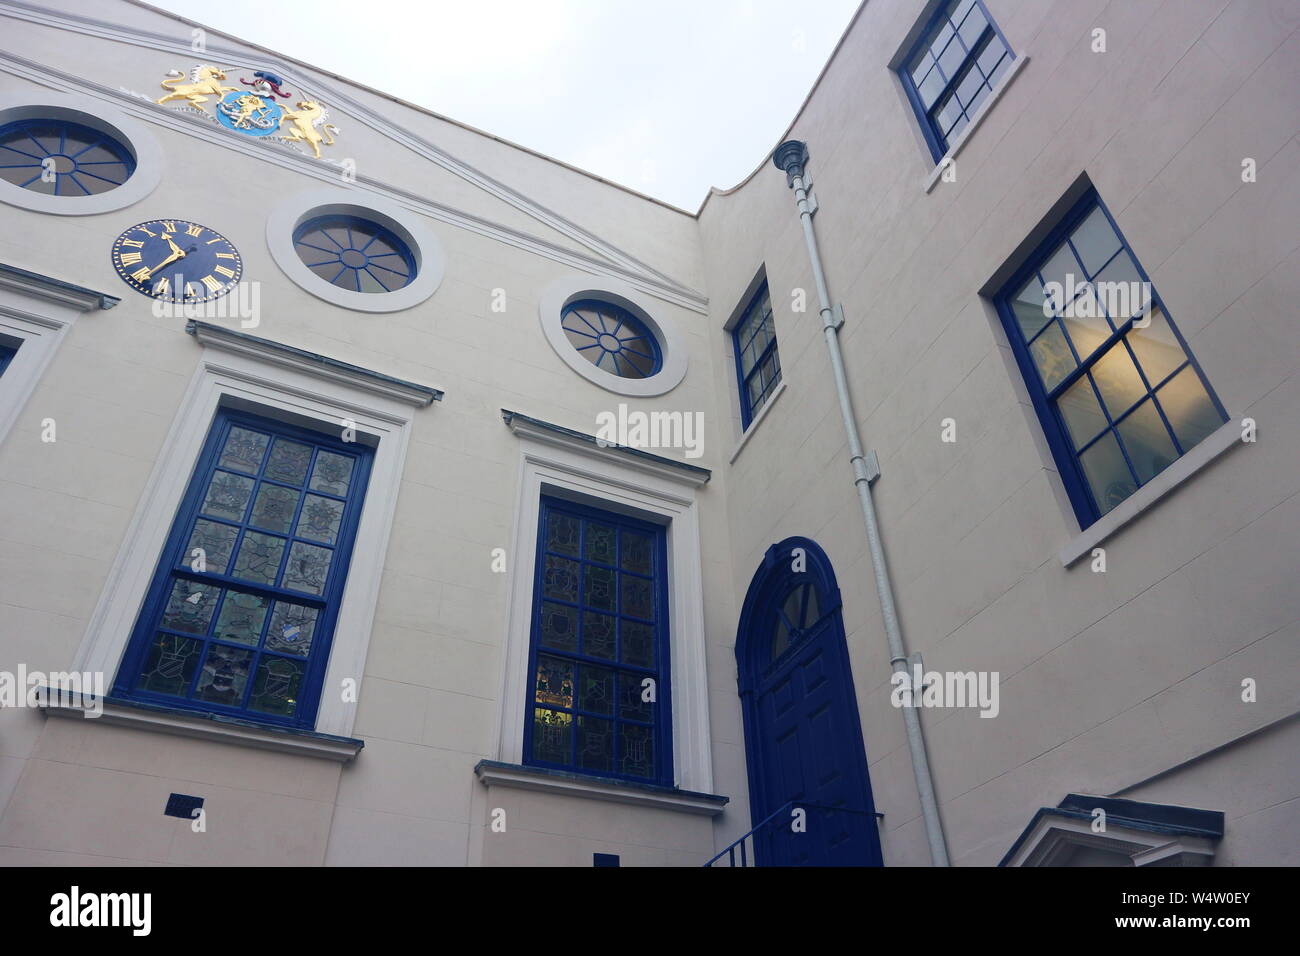 A photo of a house with blue framed windows and doors and various golden ornaments on the walls. The photo was taken in London, UK on a rainy morning. Stock Photo